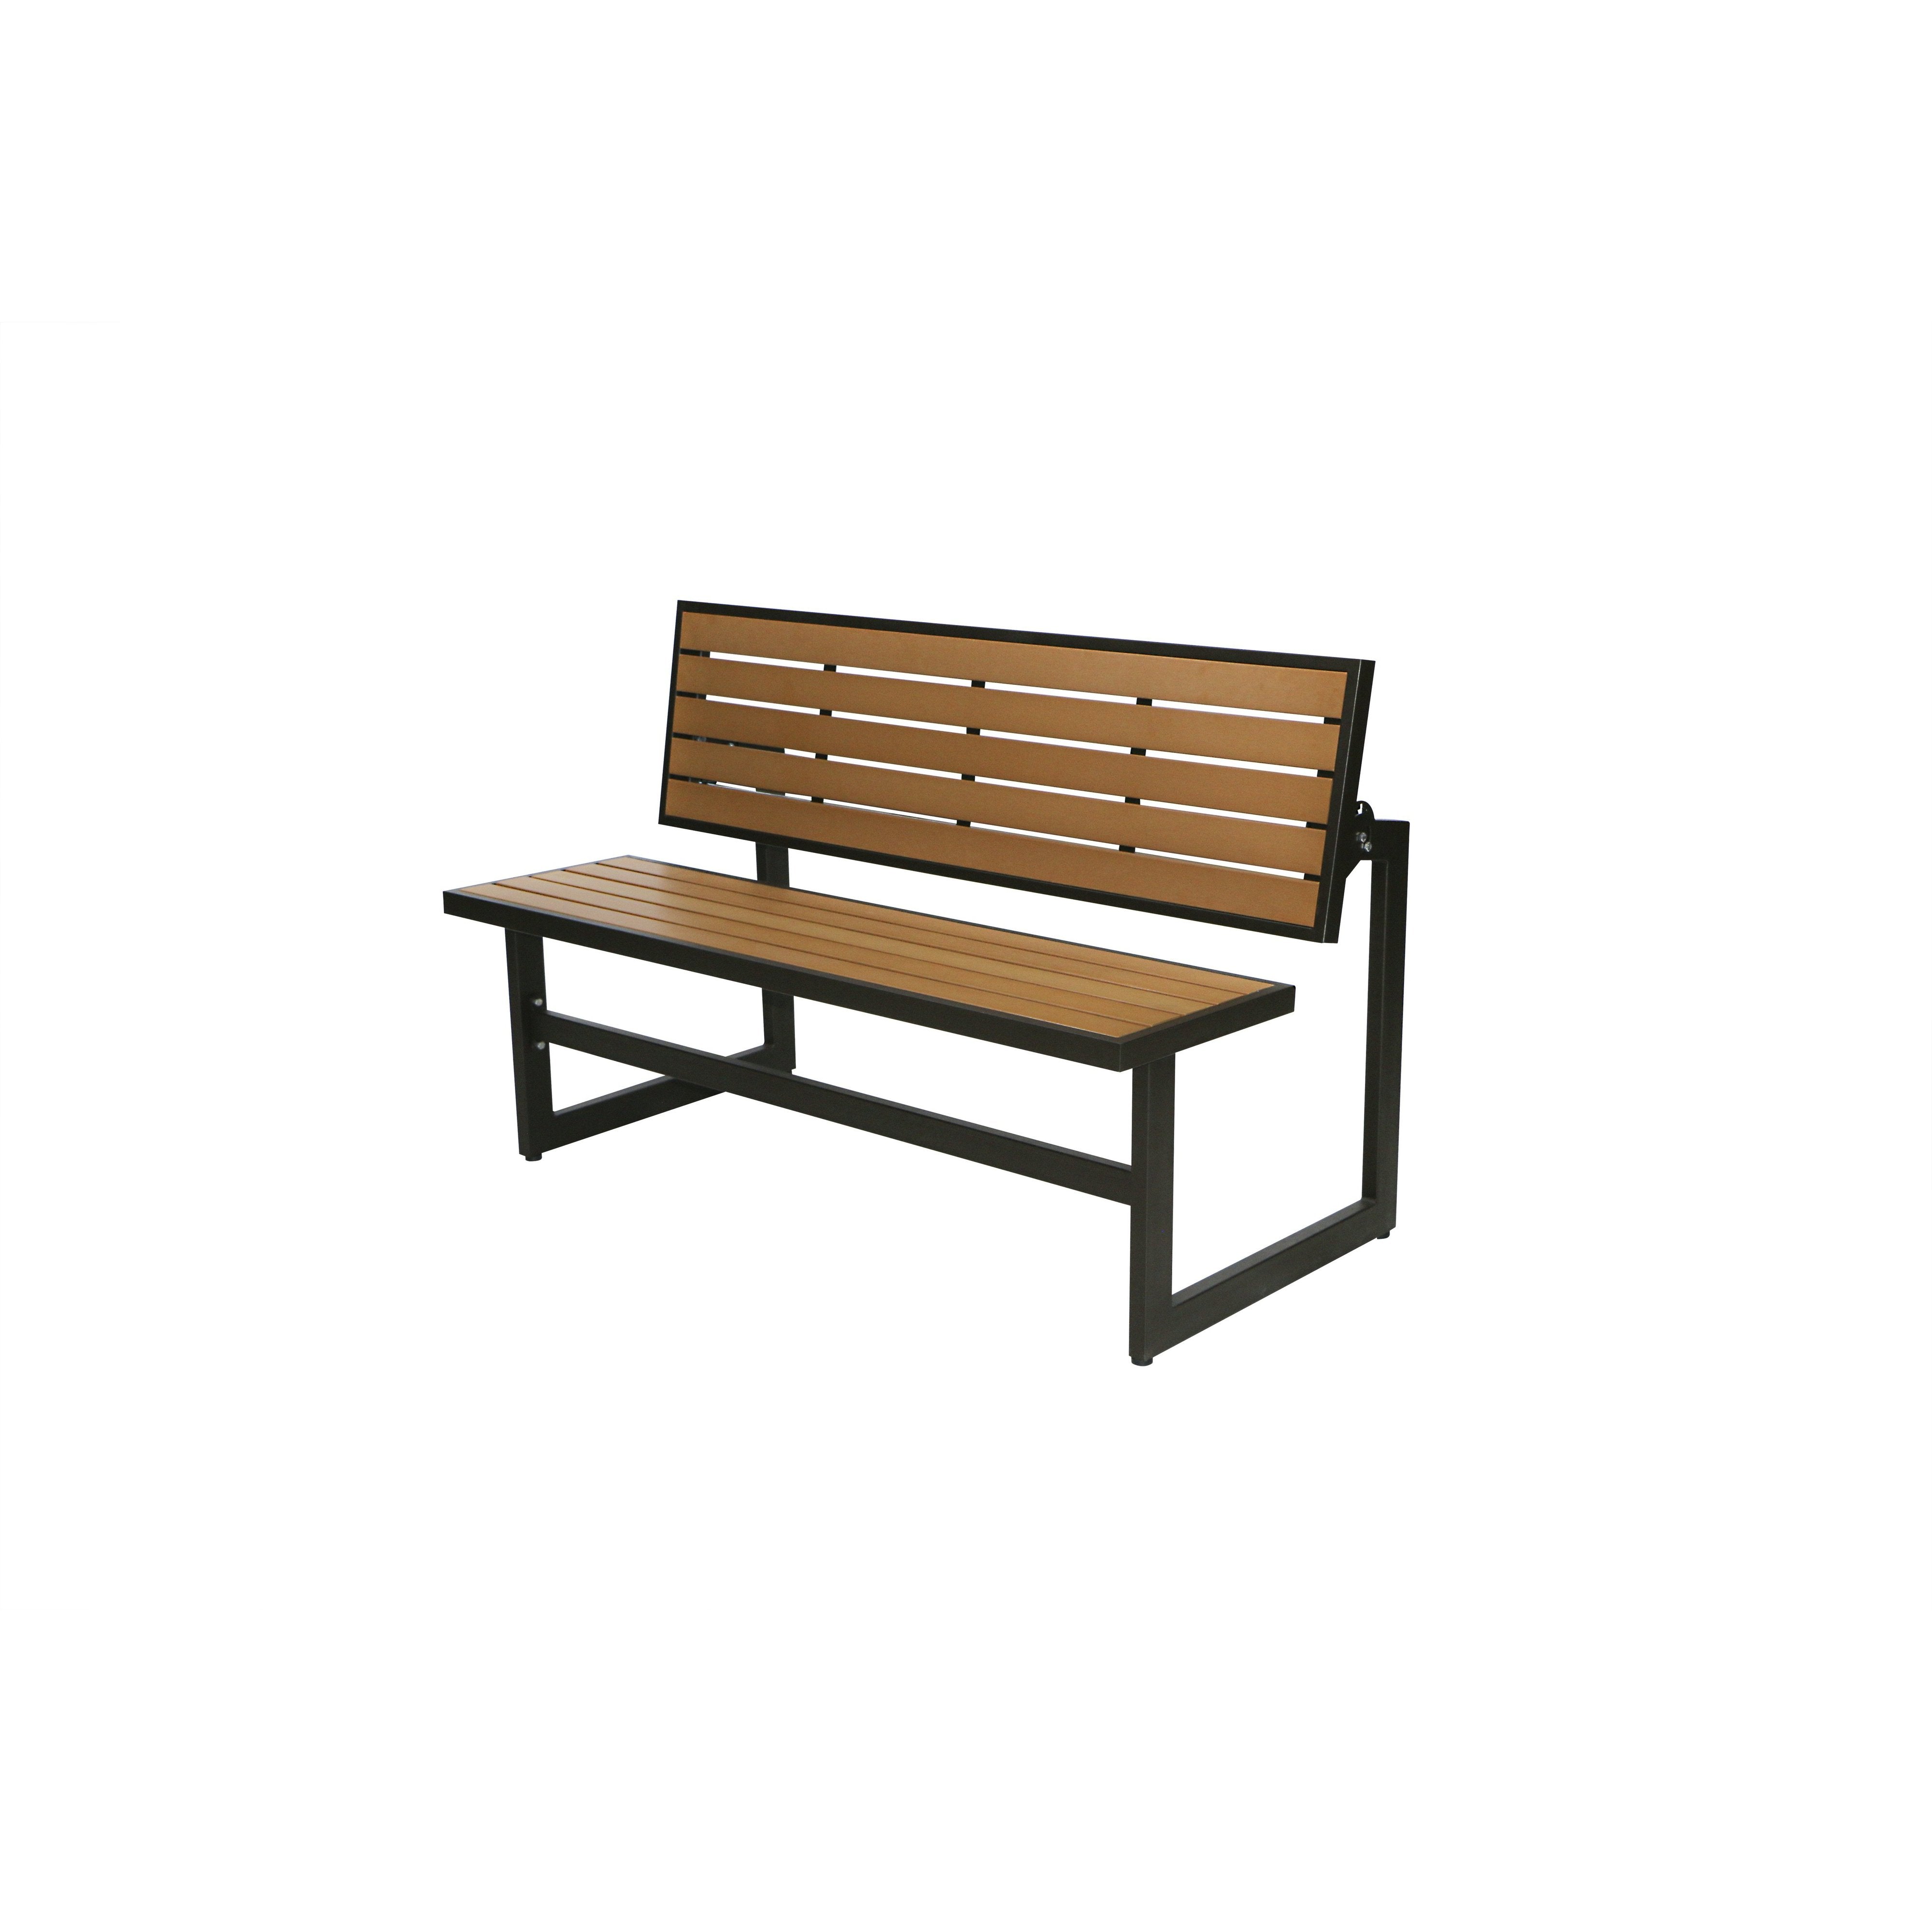 Durasheds All Products Ashton 52” Convertible Bench / Table